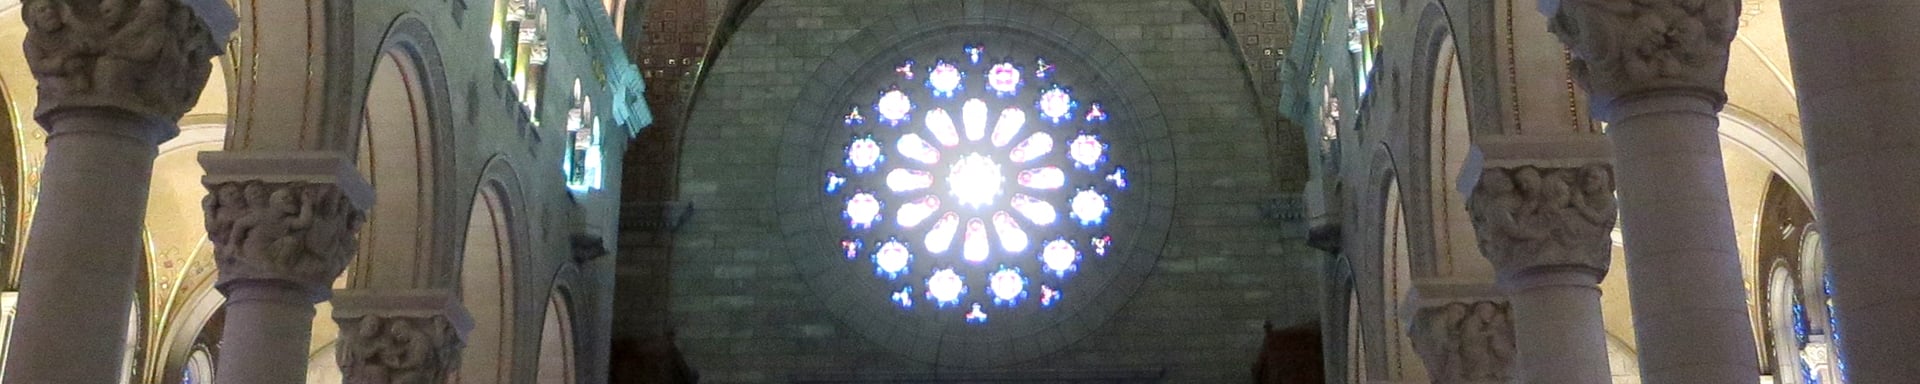 Image: stained glass window